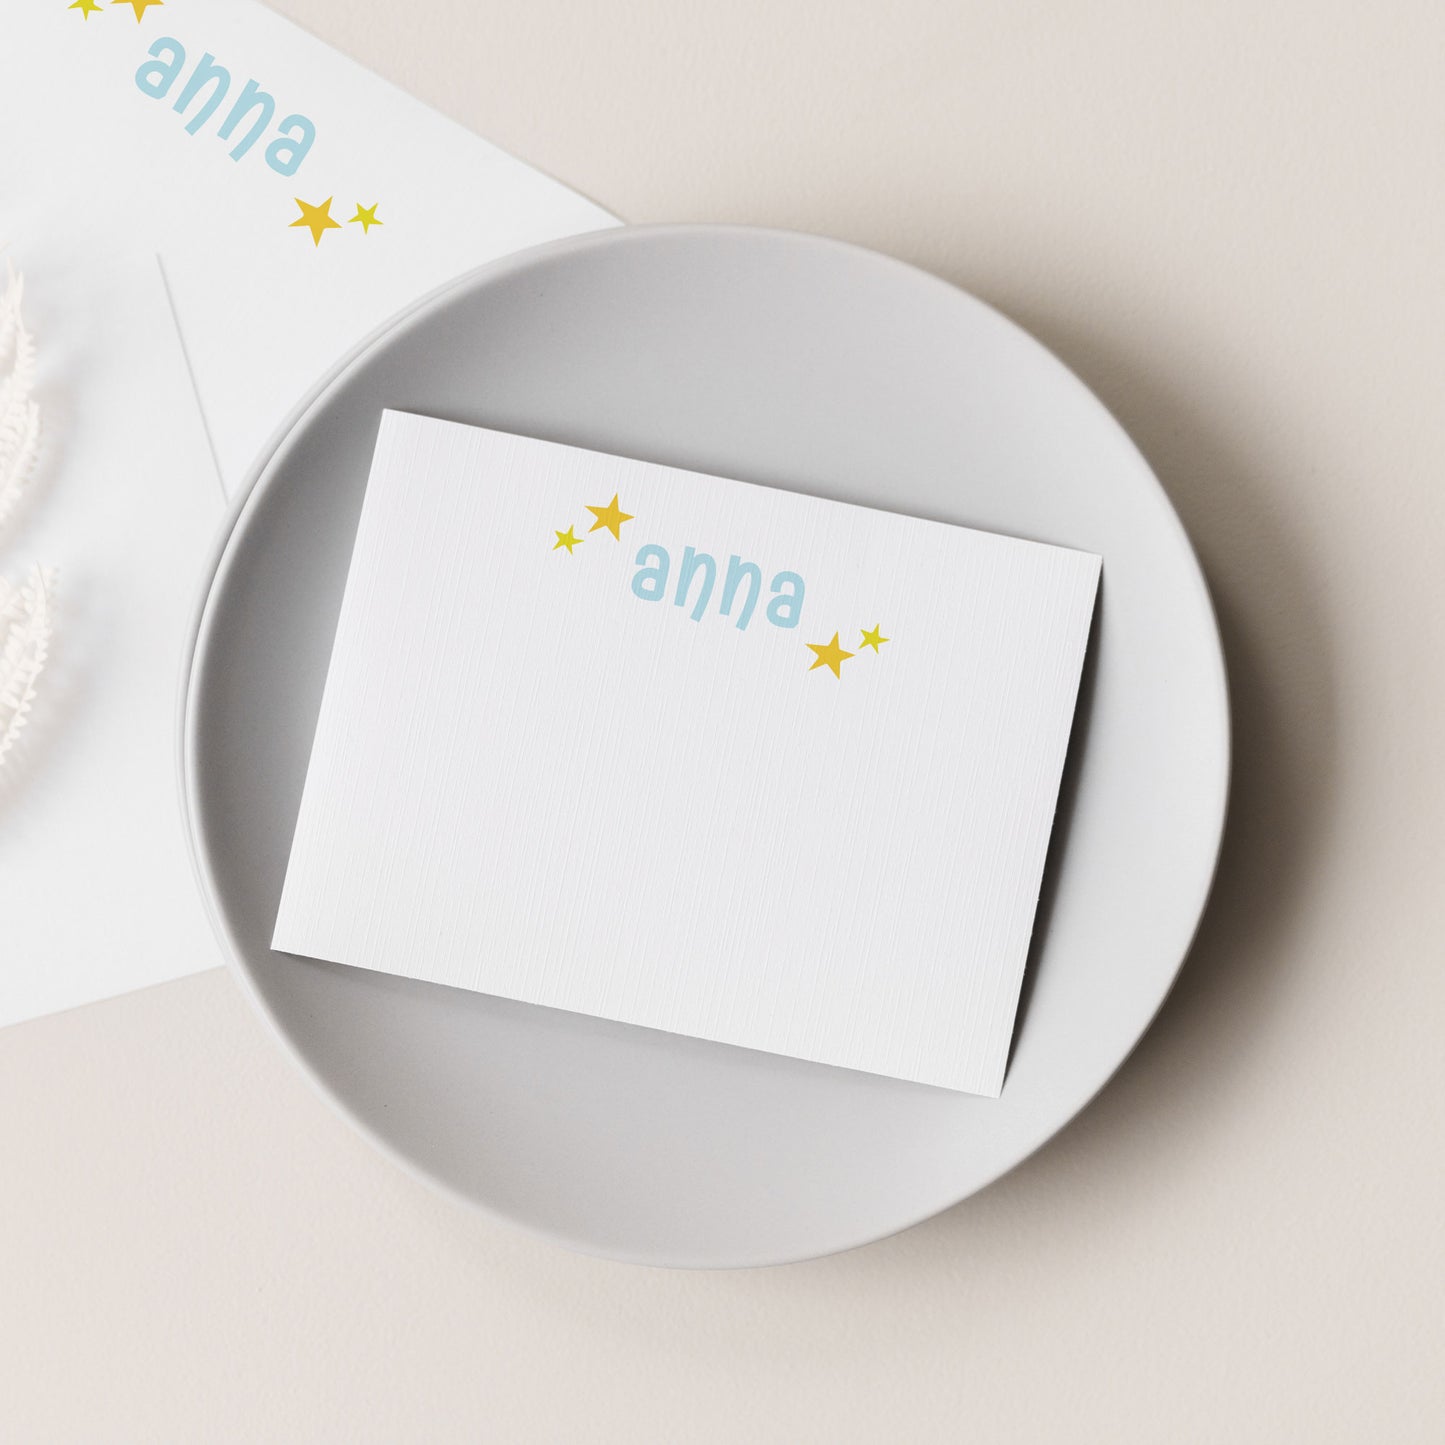 Funky Typography Personalized Stationery